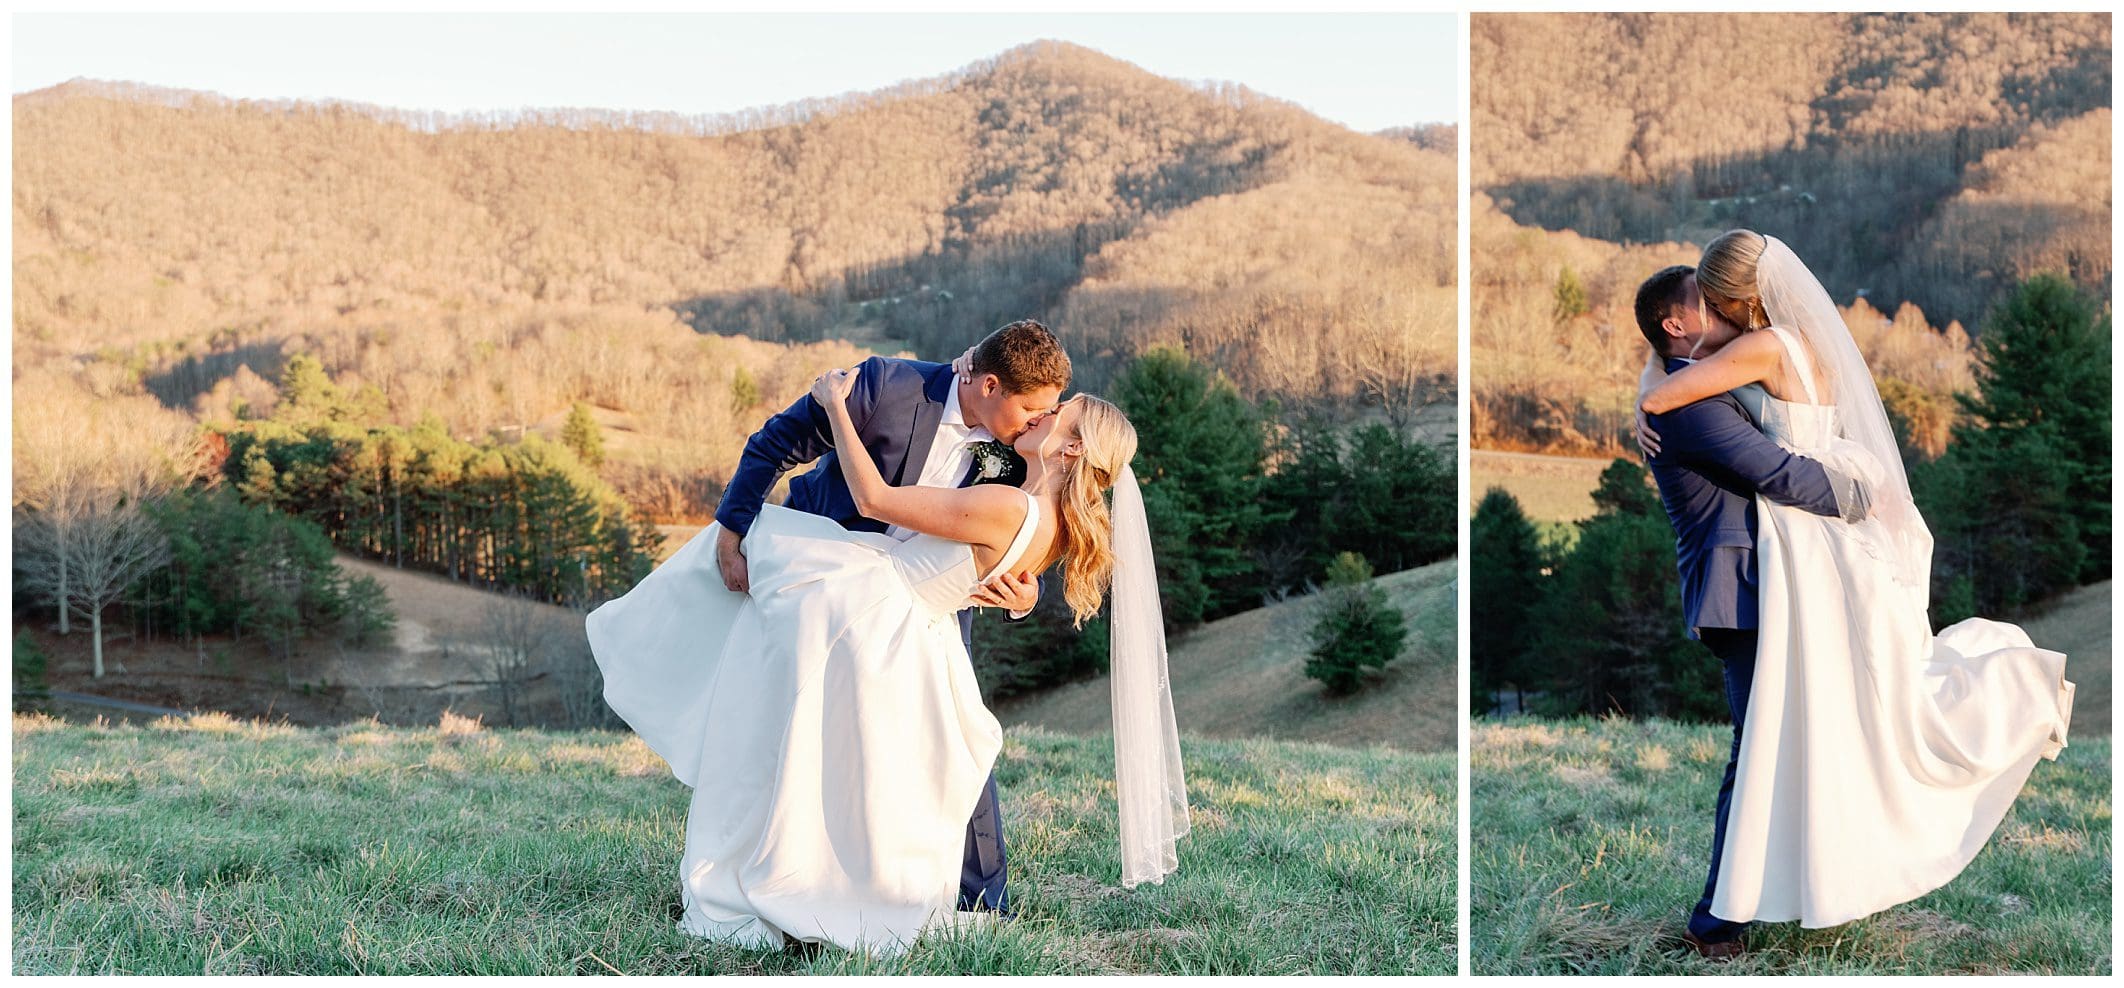 A bride and groom hugging in a field with mountains in the background.